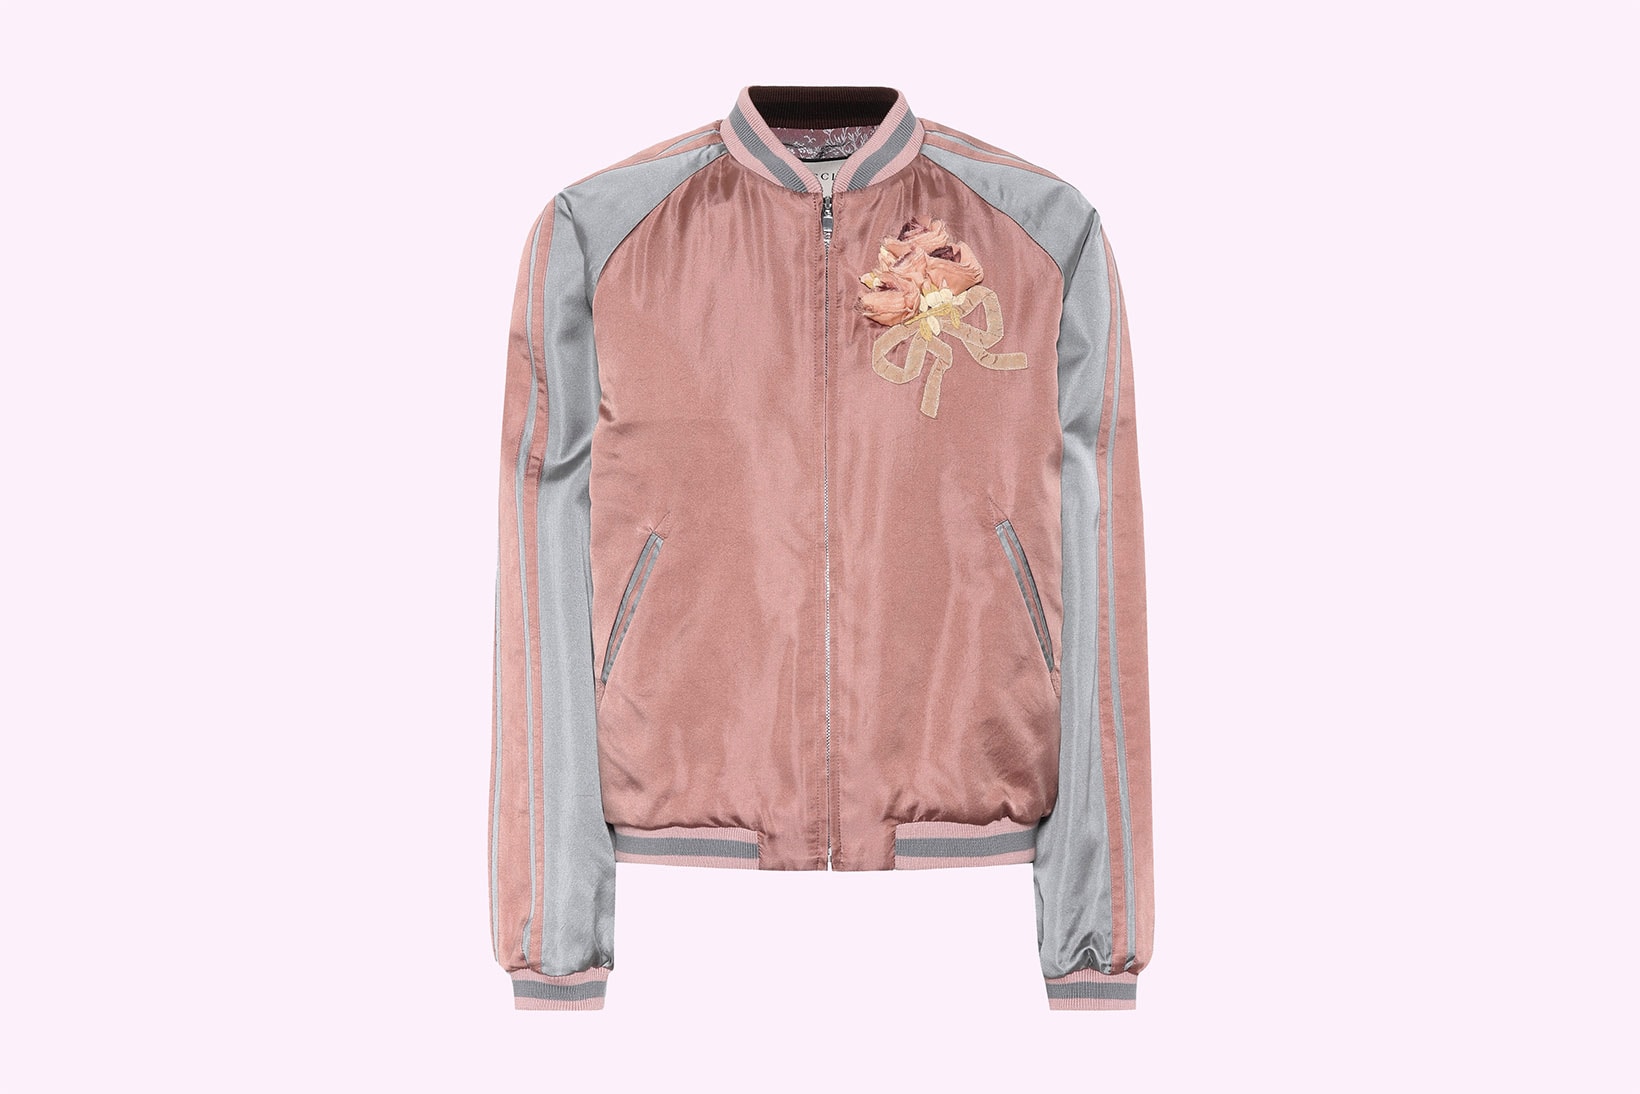 Gucci Embellished Guccy Cat Satin Bomber Jacket bootleg sequins pearls pink grey silver retro where to buy mytheresa.com alessandro michele